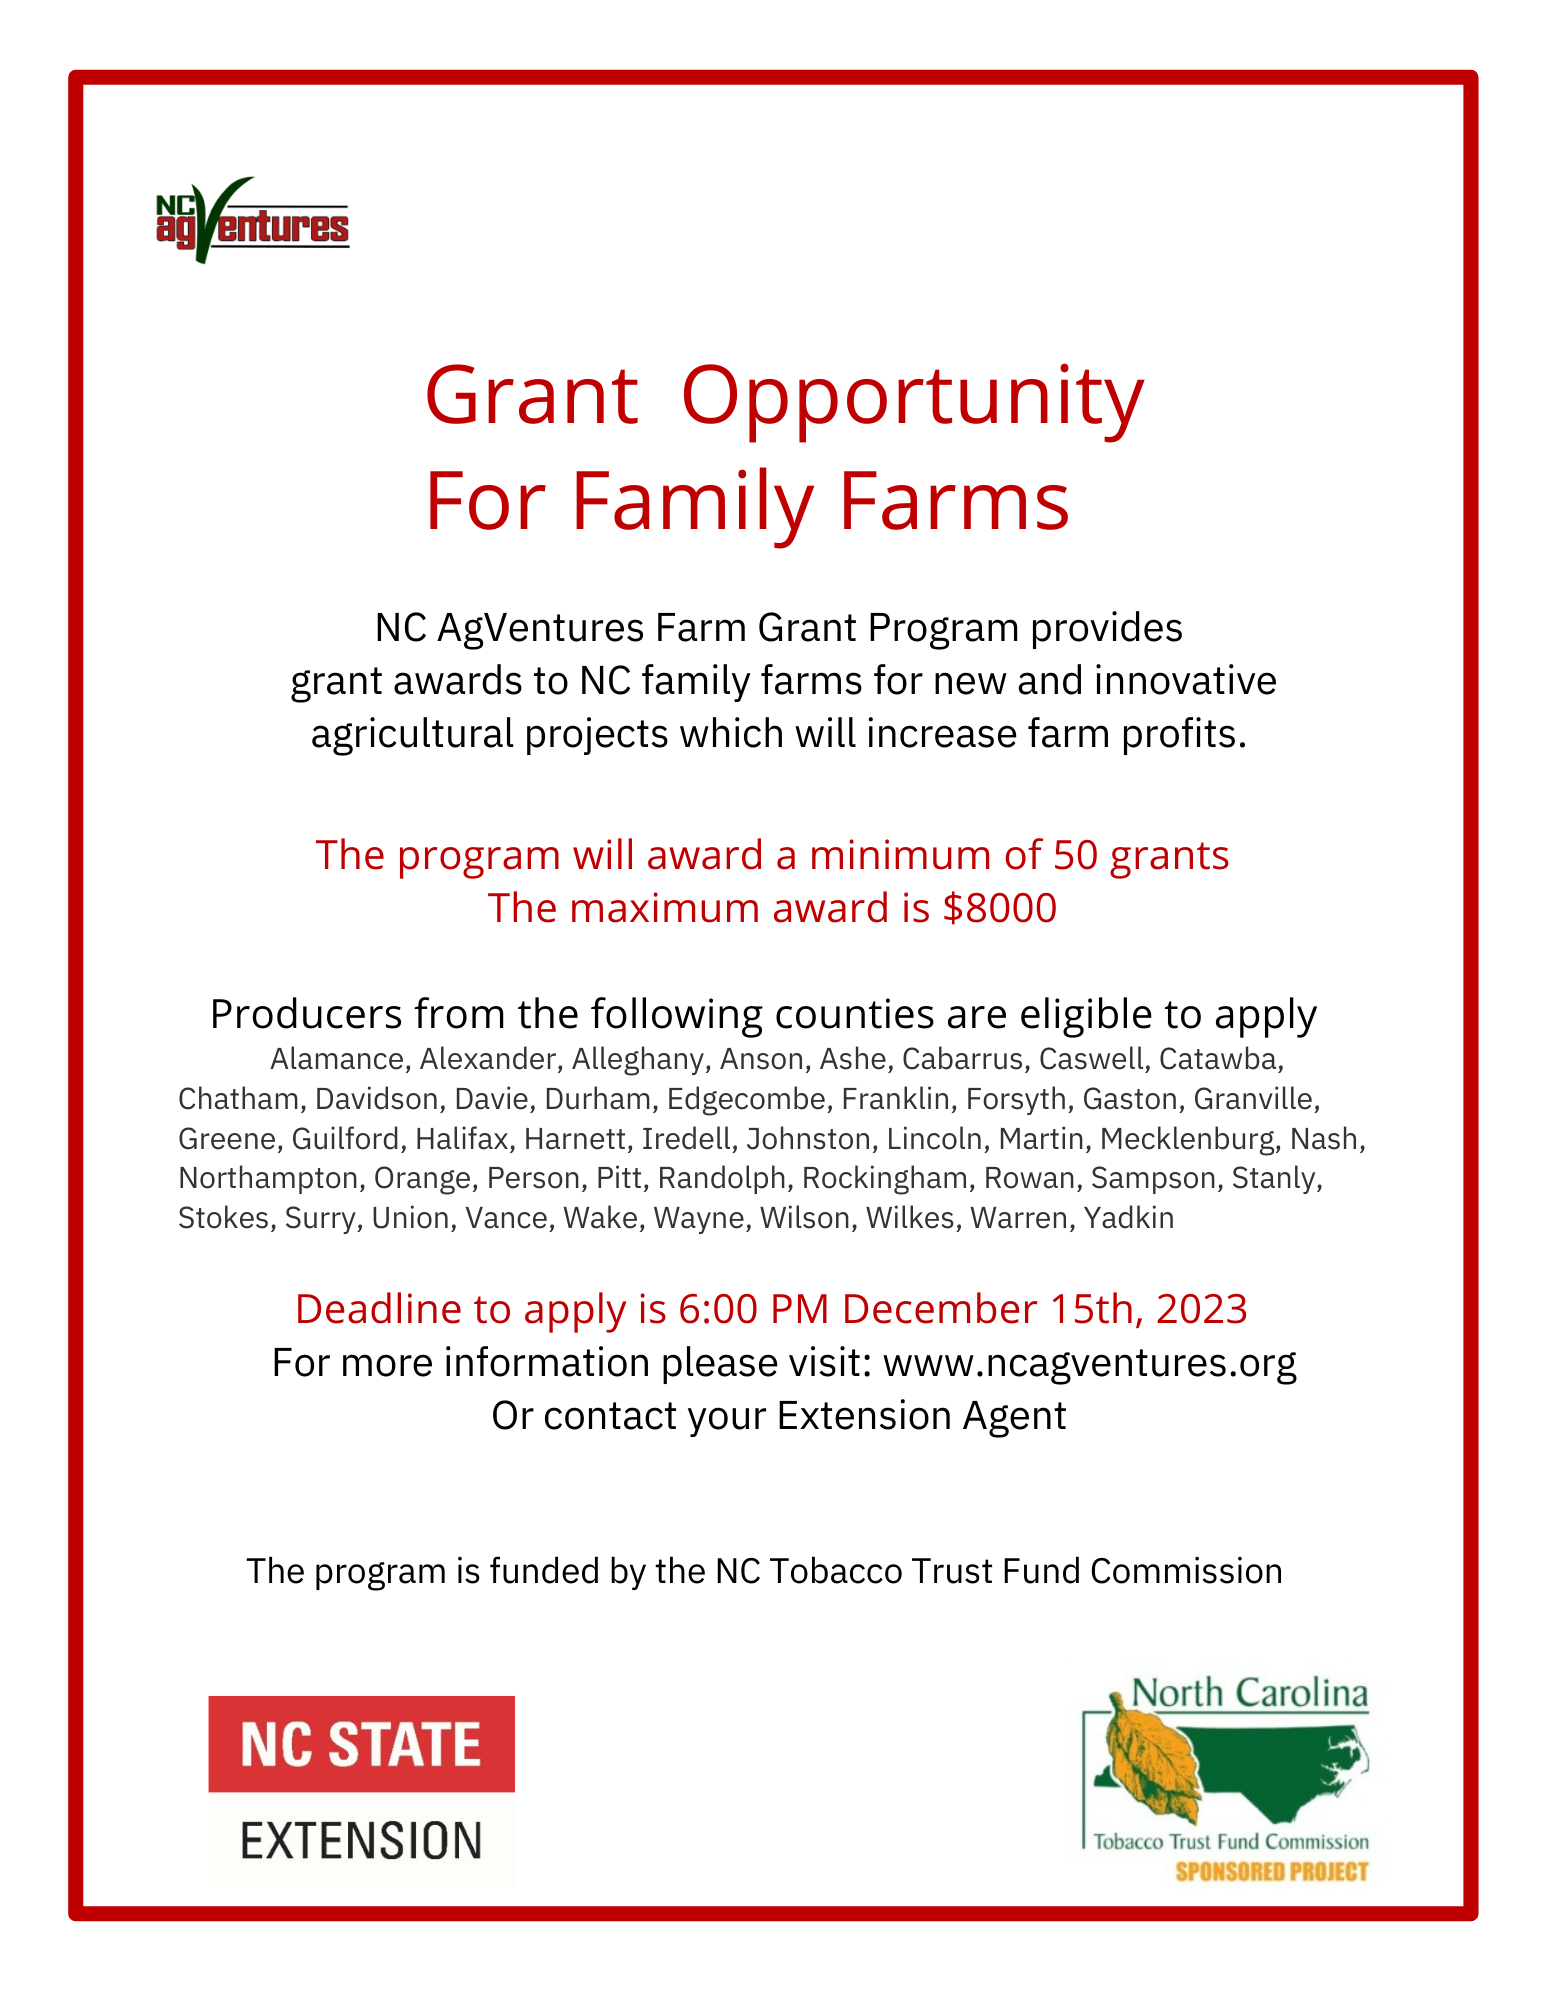 Grant Opportunity for Family Farms